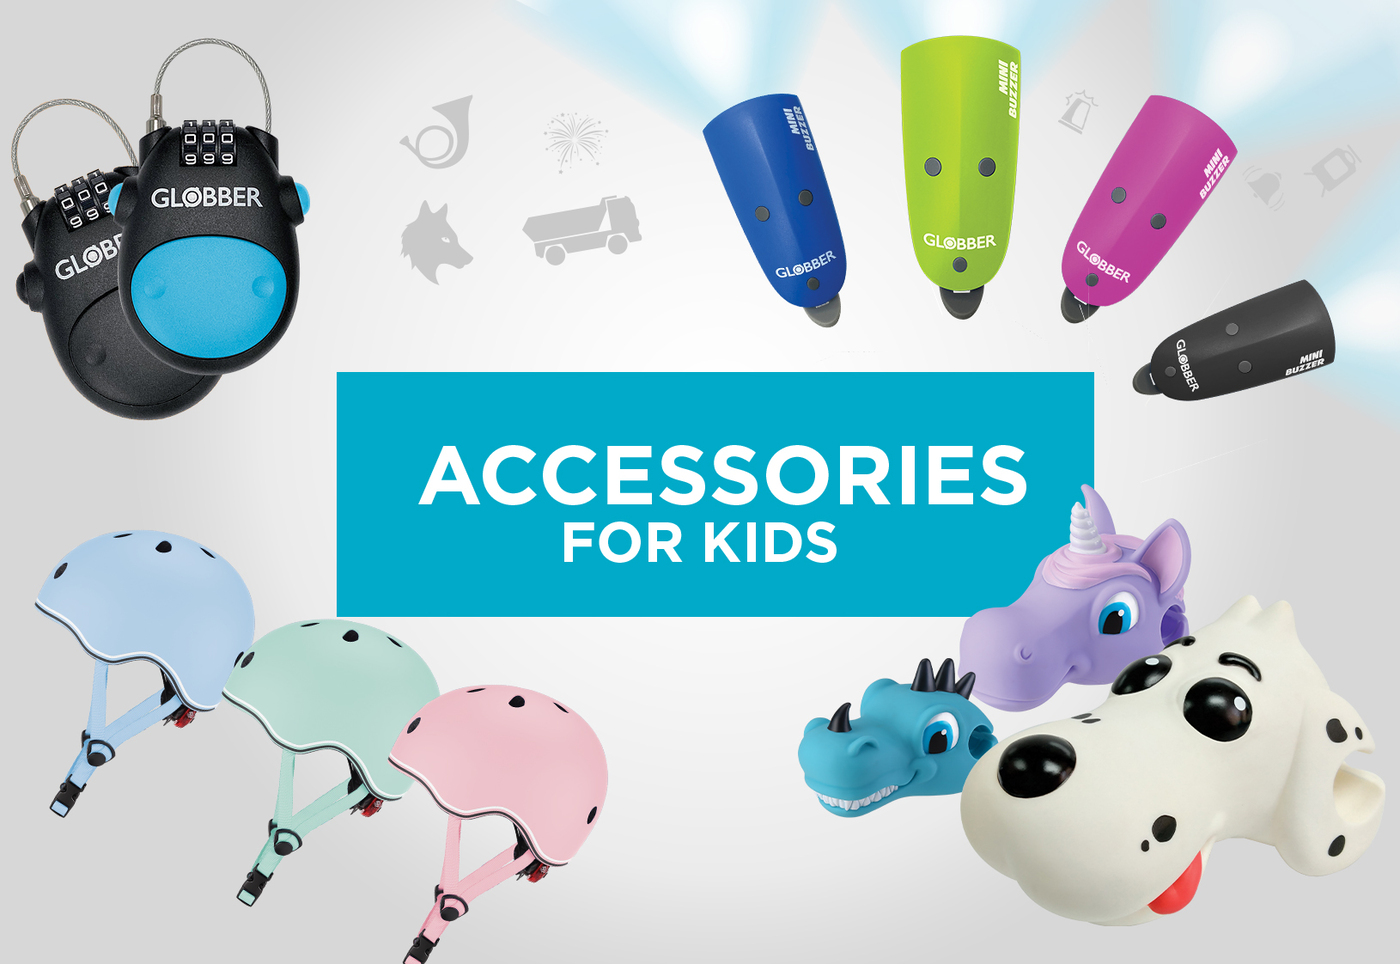 Accessories for kids, teens & adults.